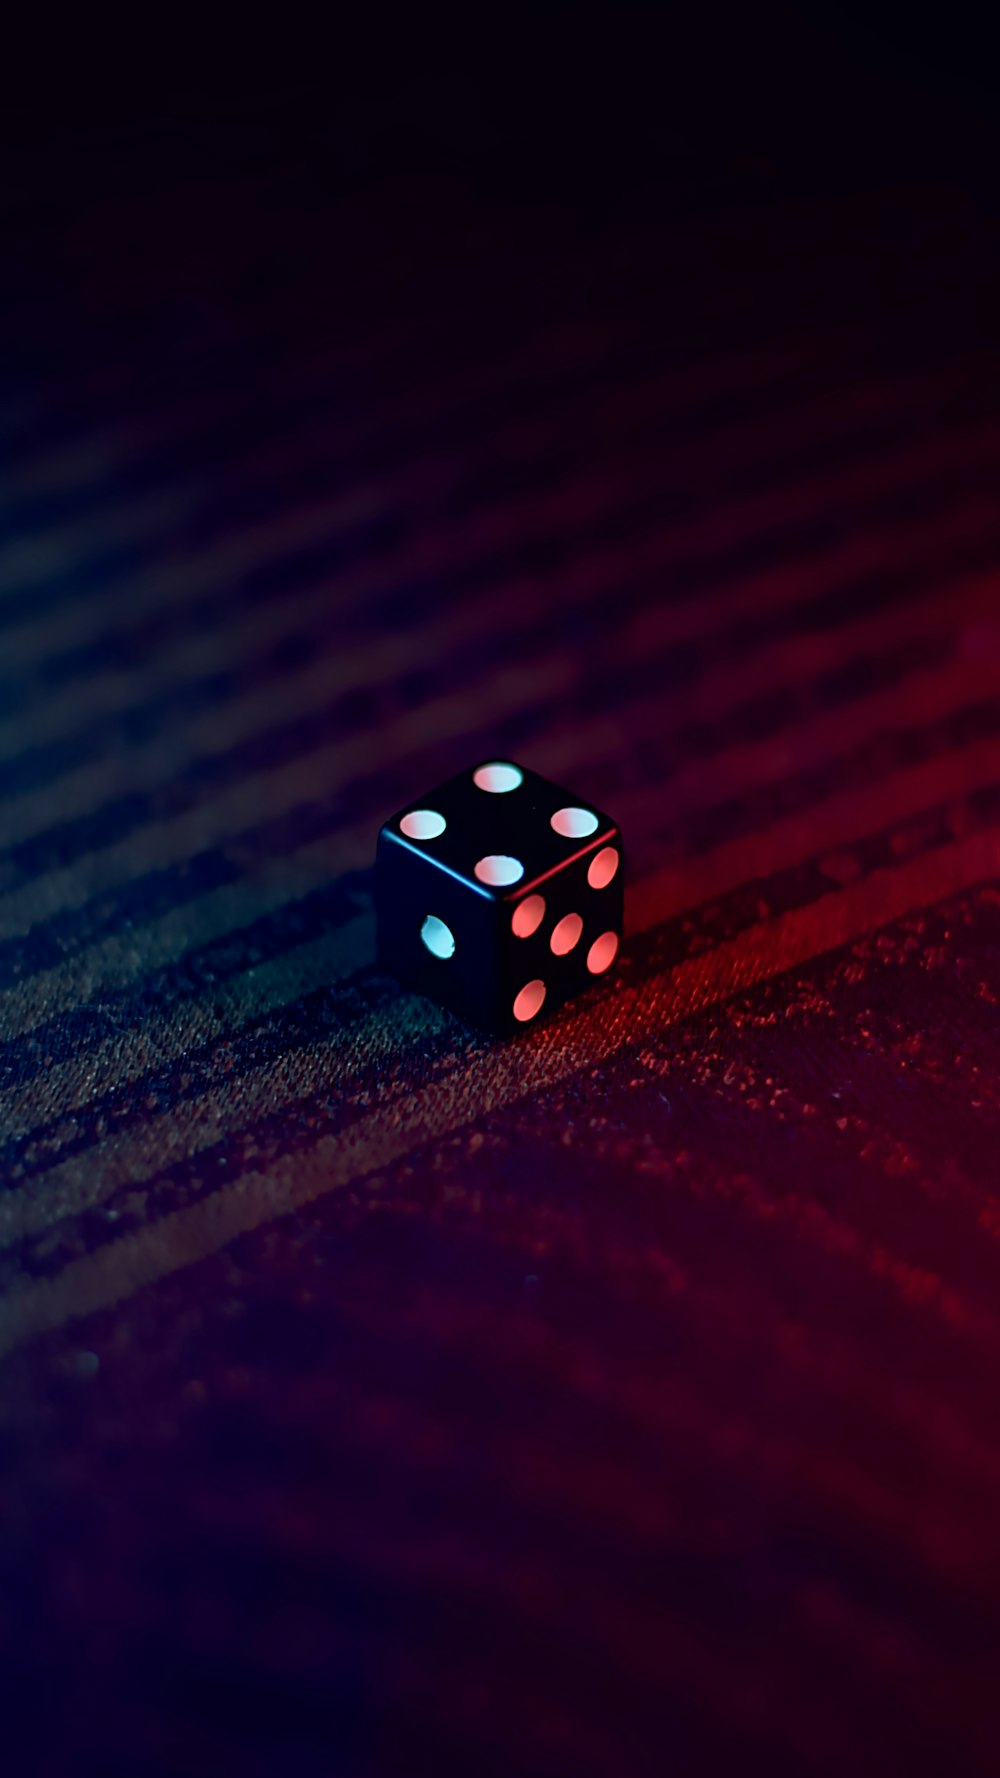 white and black dice on red textile